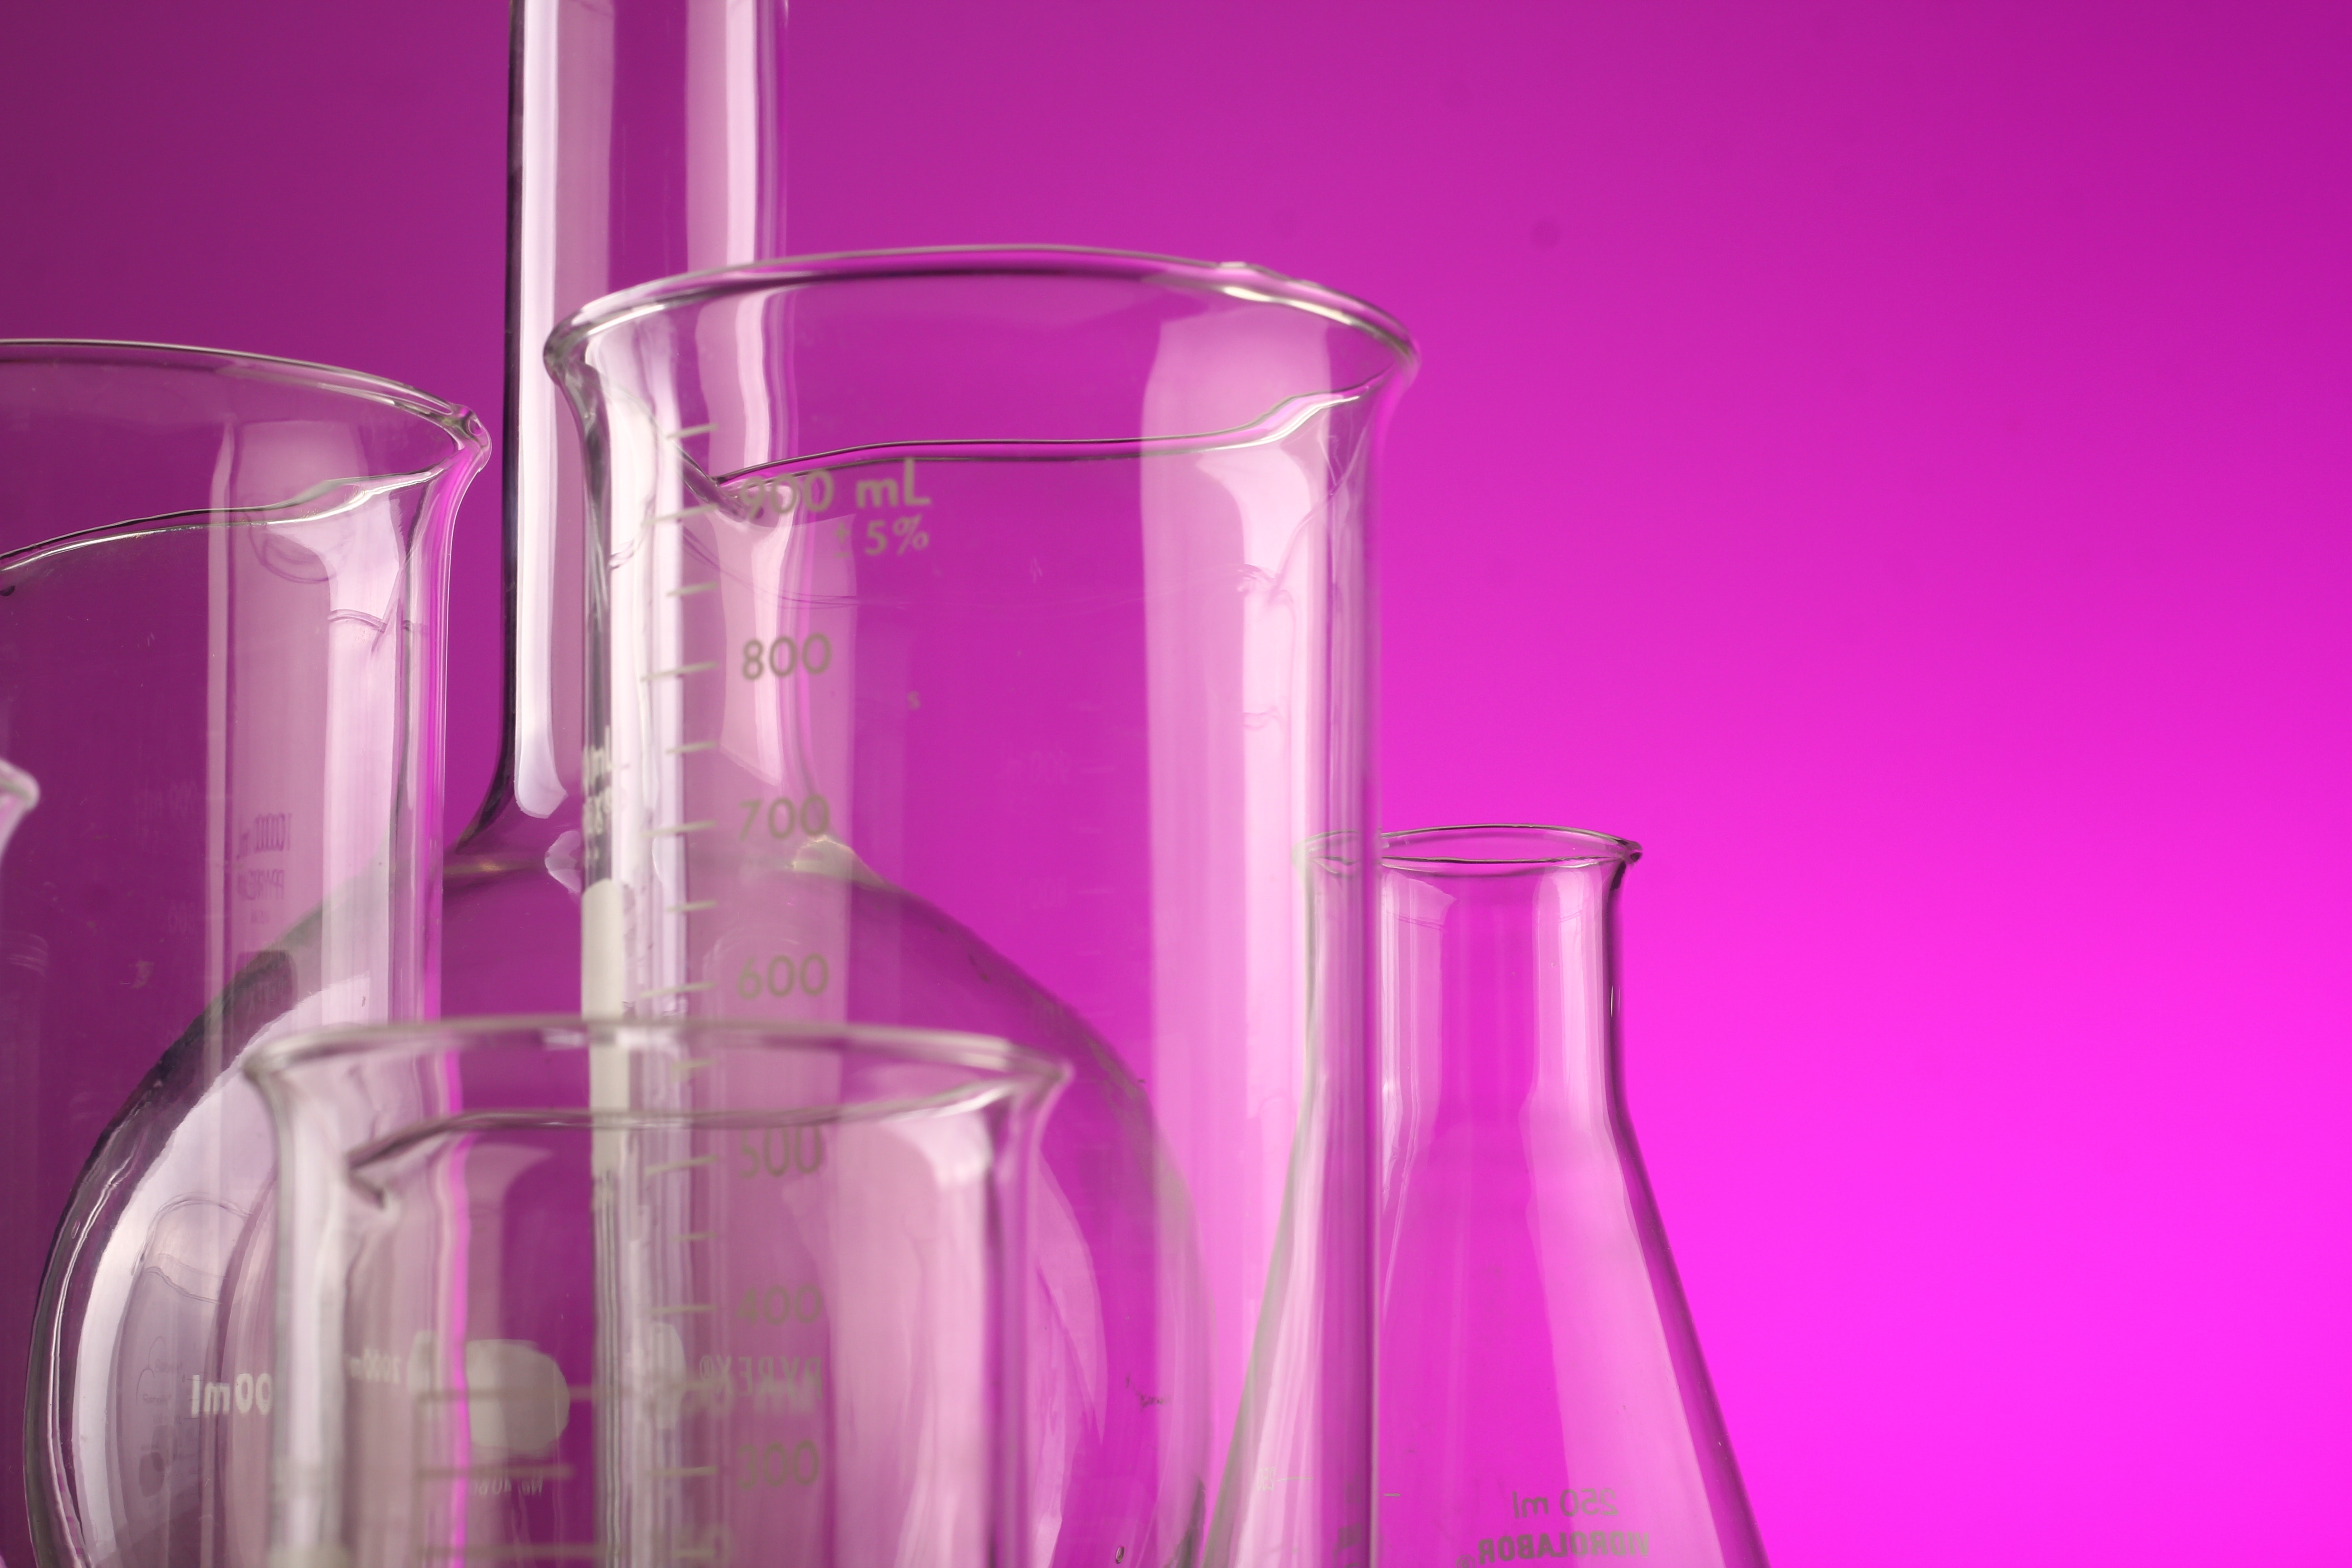 Several laboratory beakers and cylinders